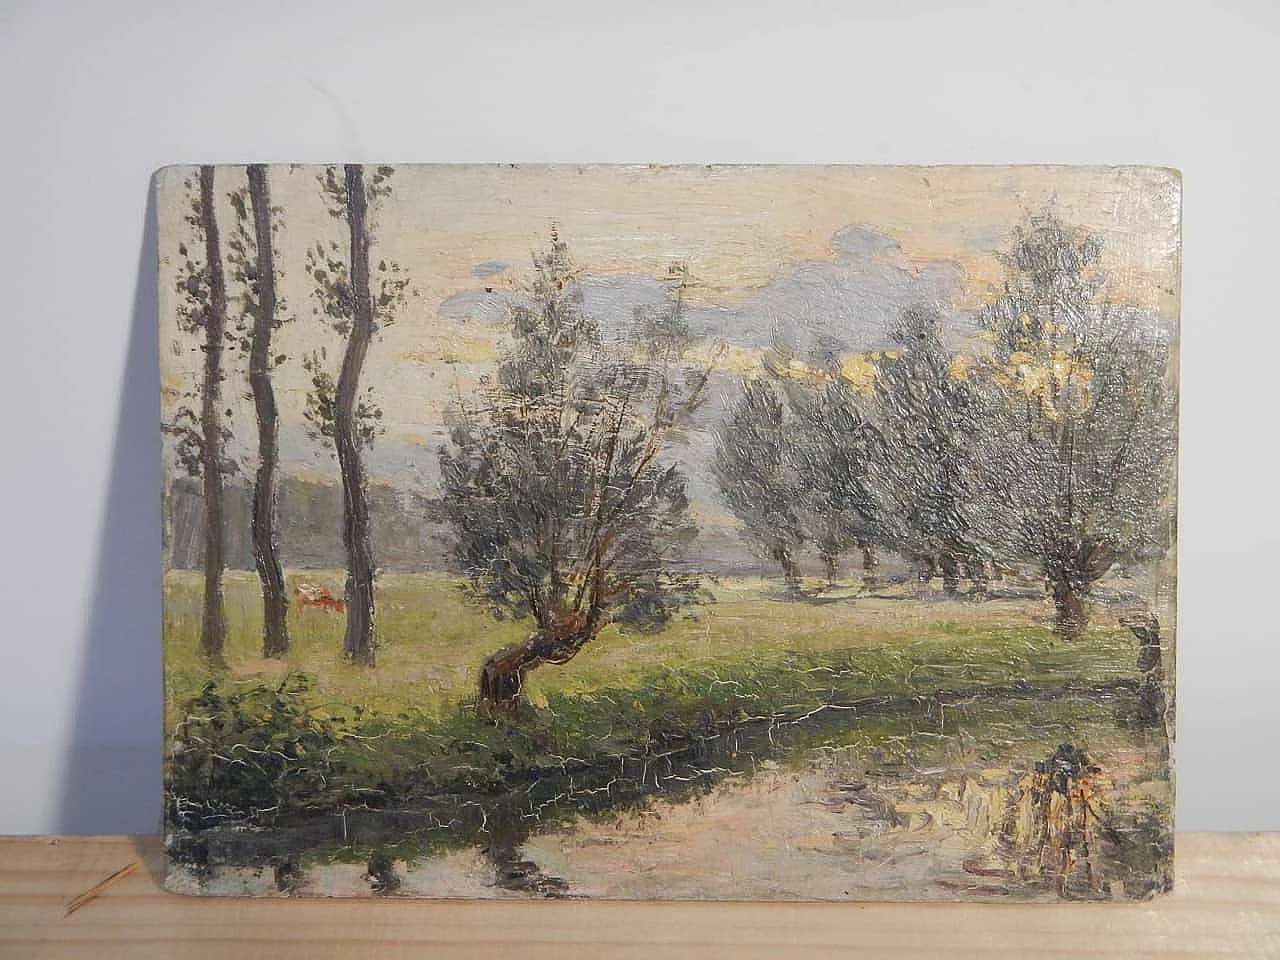 Des Champs, brook, painting on wood, early 20th century 8